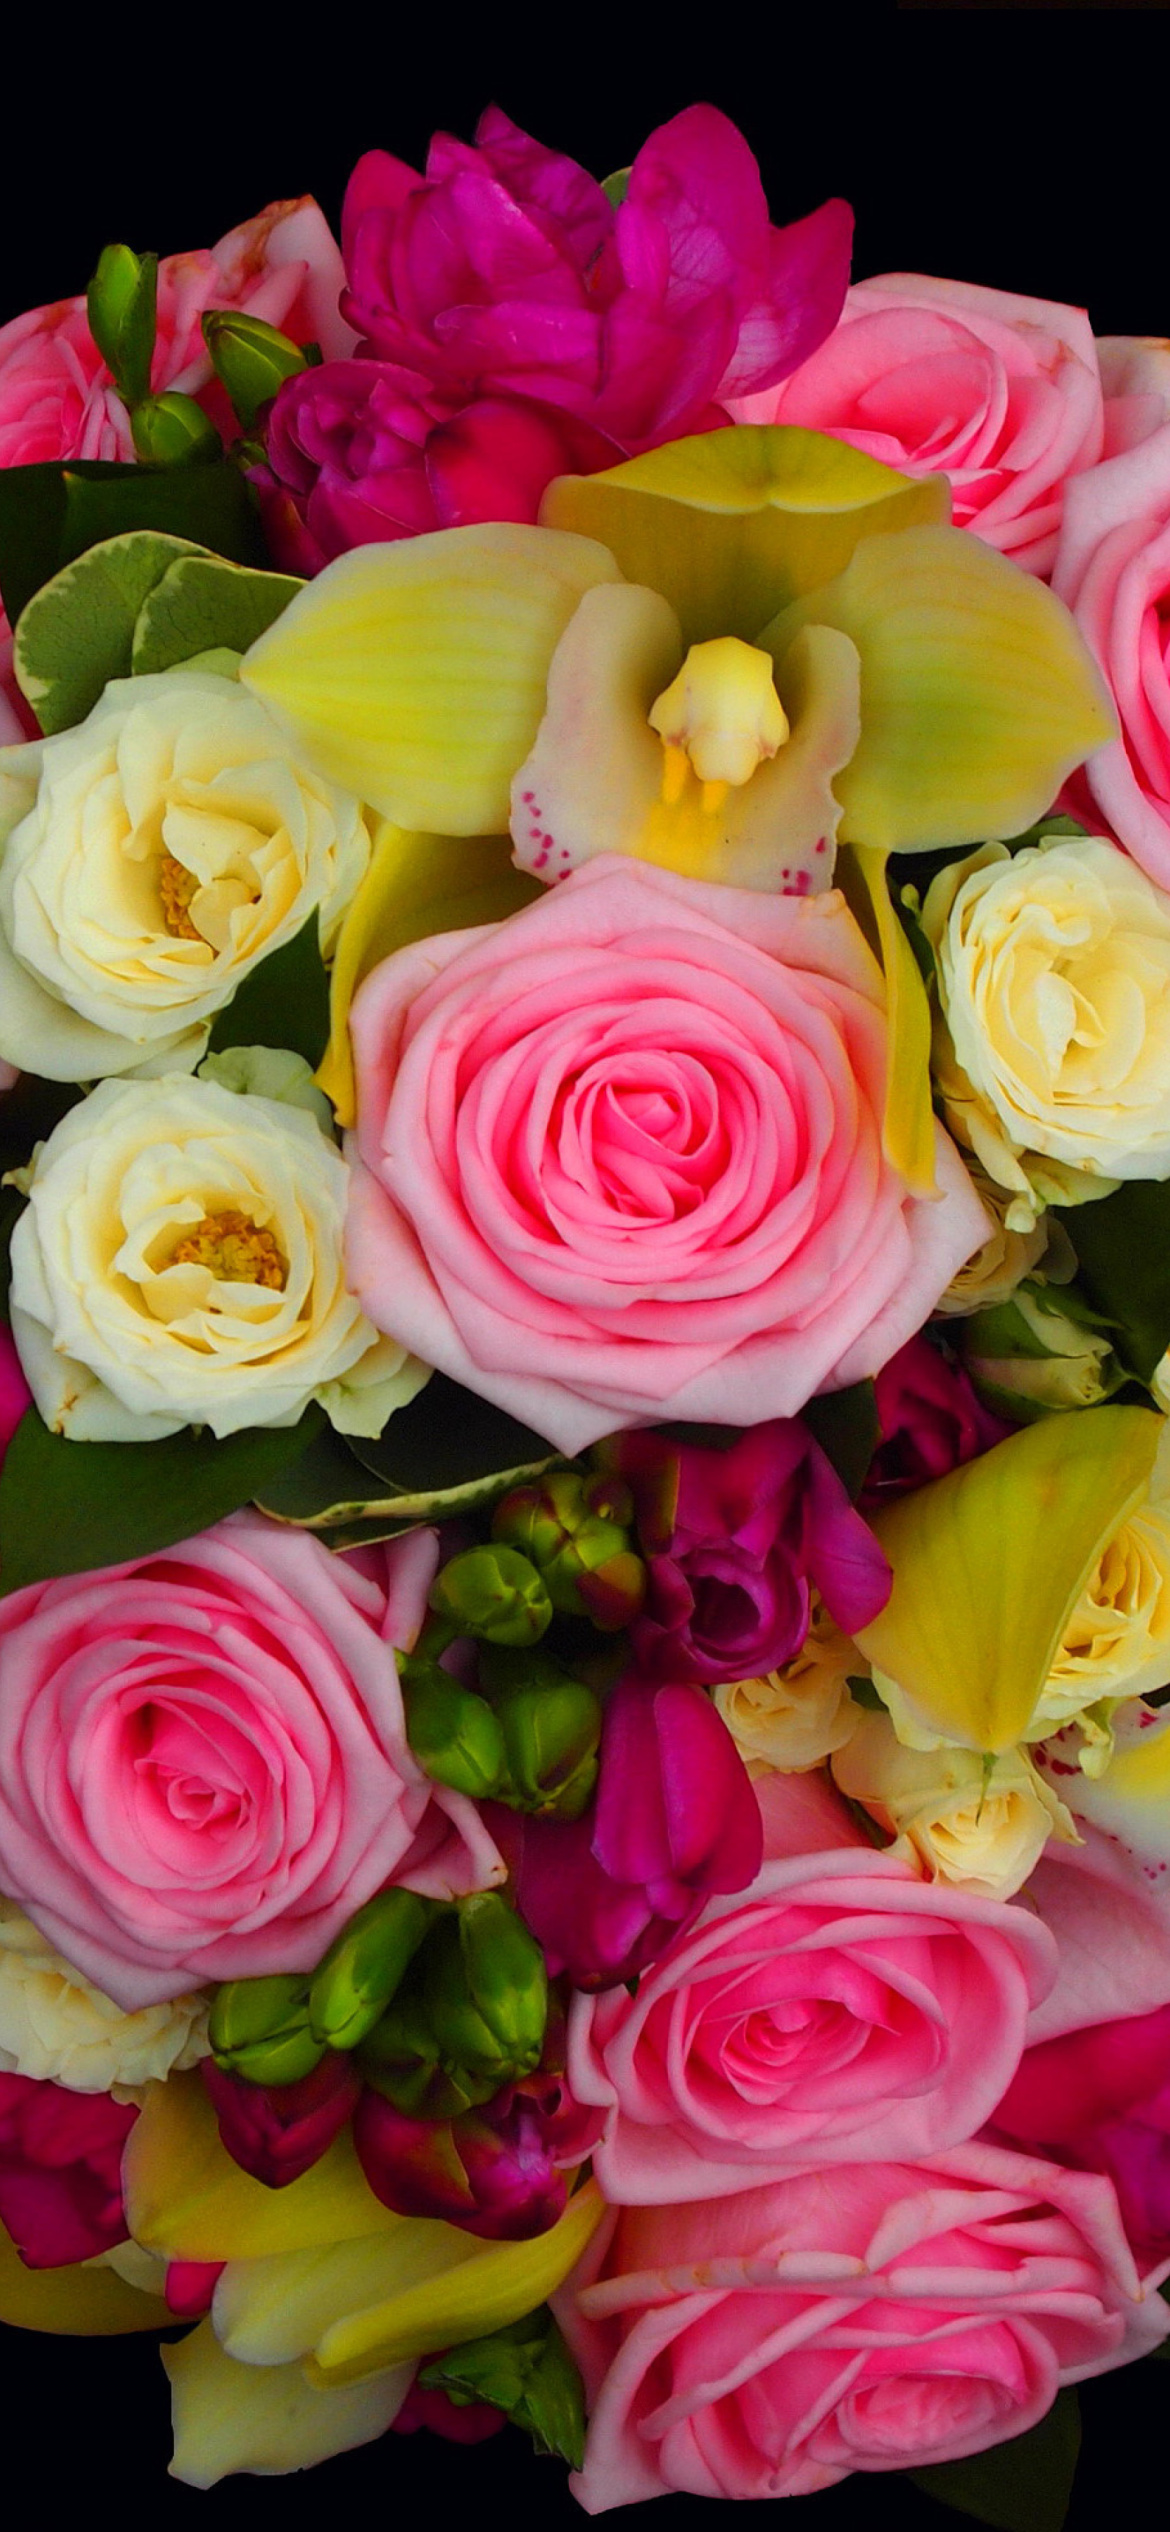 Bouquet of roses and yellow orchid, floristry wallpaper 1170x2532